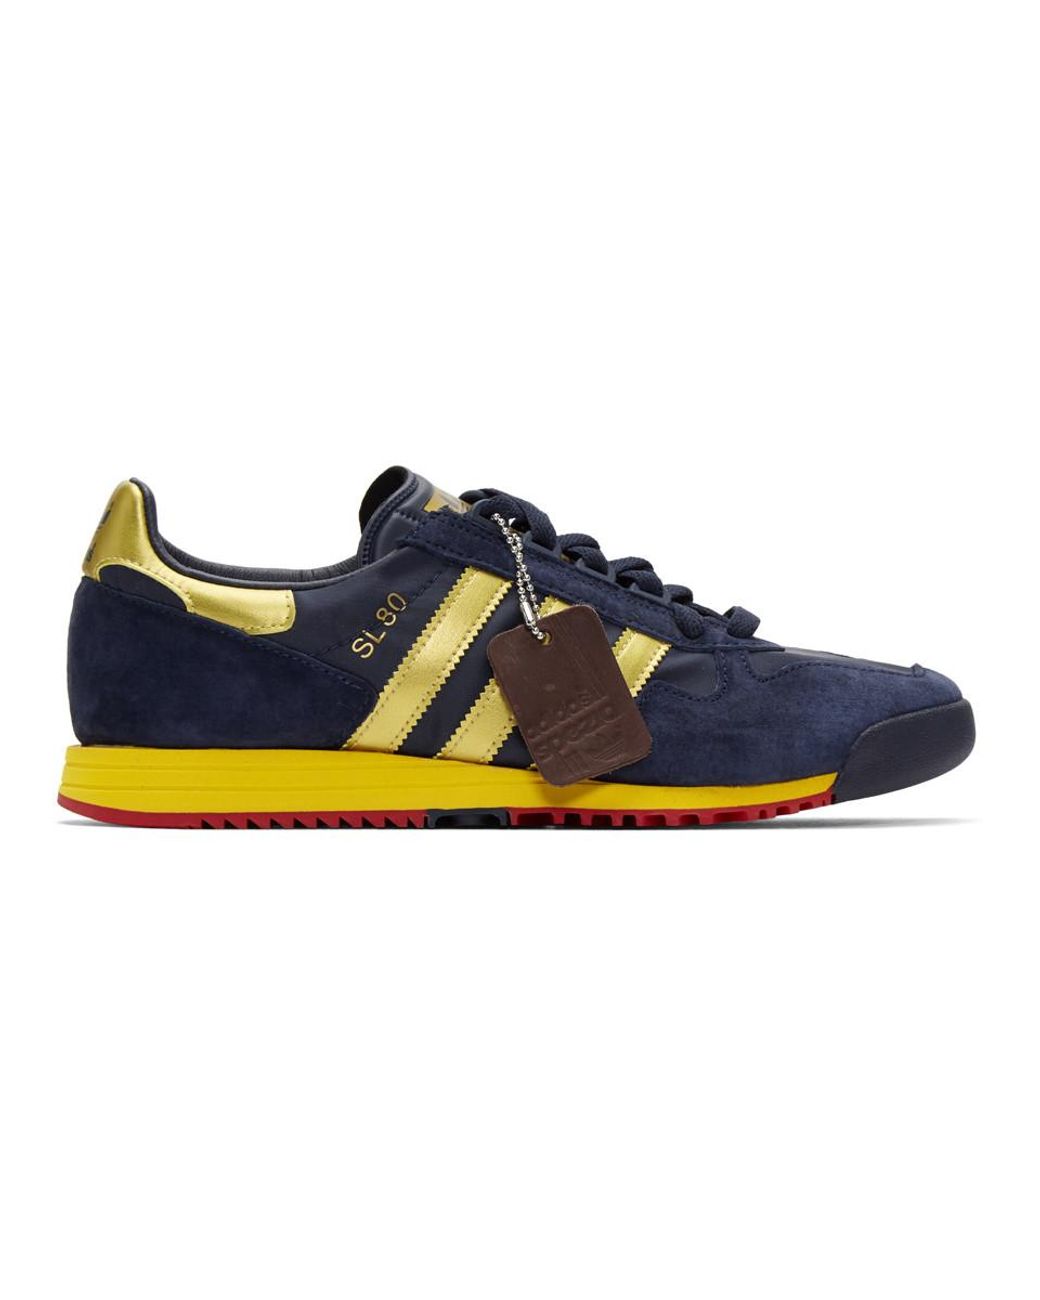 adidas Originals Navy And Gold Sl 80 Spzl Sneakers in Blue for Men ...